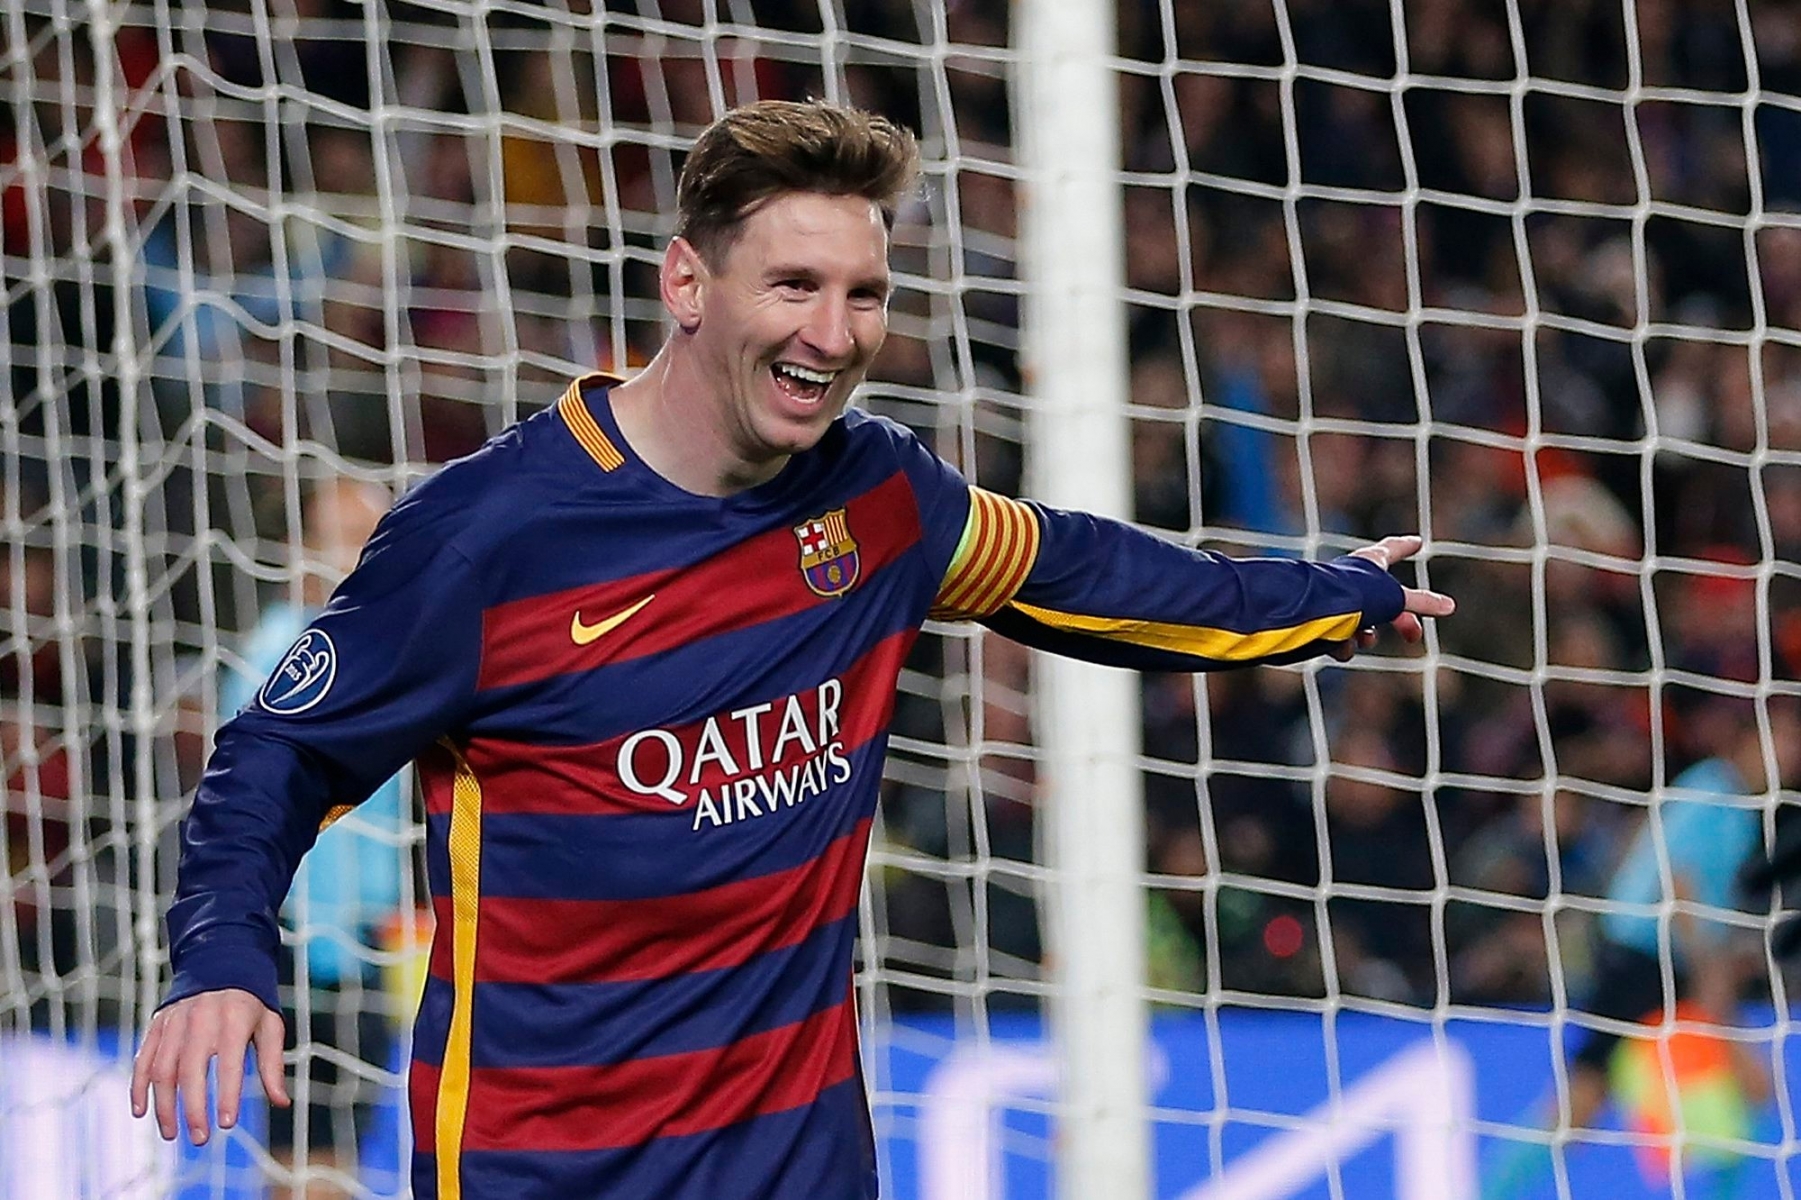 FILE - In this Nov. 24, 2015 file picture Barcelona's Lionel Messi, celebrates after scoring his team's 5th goal during the Group E Champions League soccer match between Barcelona and Roma at the Camp Nou stadium in Barcelona, Spain. Neymar has made the three-man Ballon D'Or shortlist for the first time, alongside Barcelona teammate Lionel Messi and title holder Cristiano Ronaldo.  (AP Photo/Emilio Morenatti,File) Switzerland Soccer Ballon d'Or Shortlist